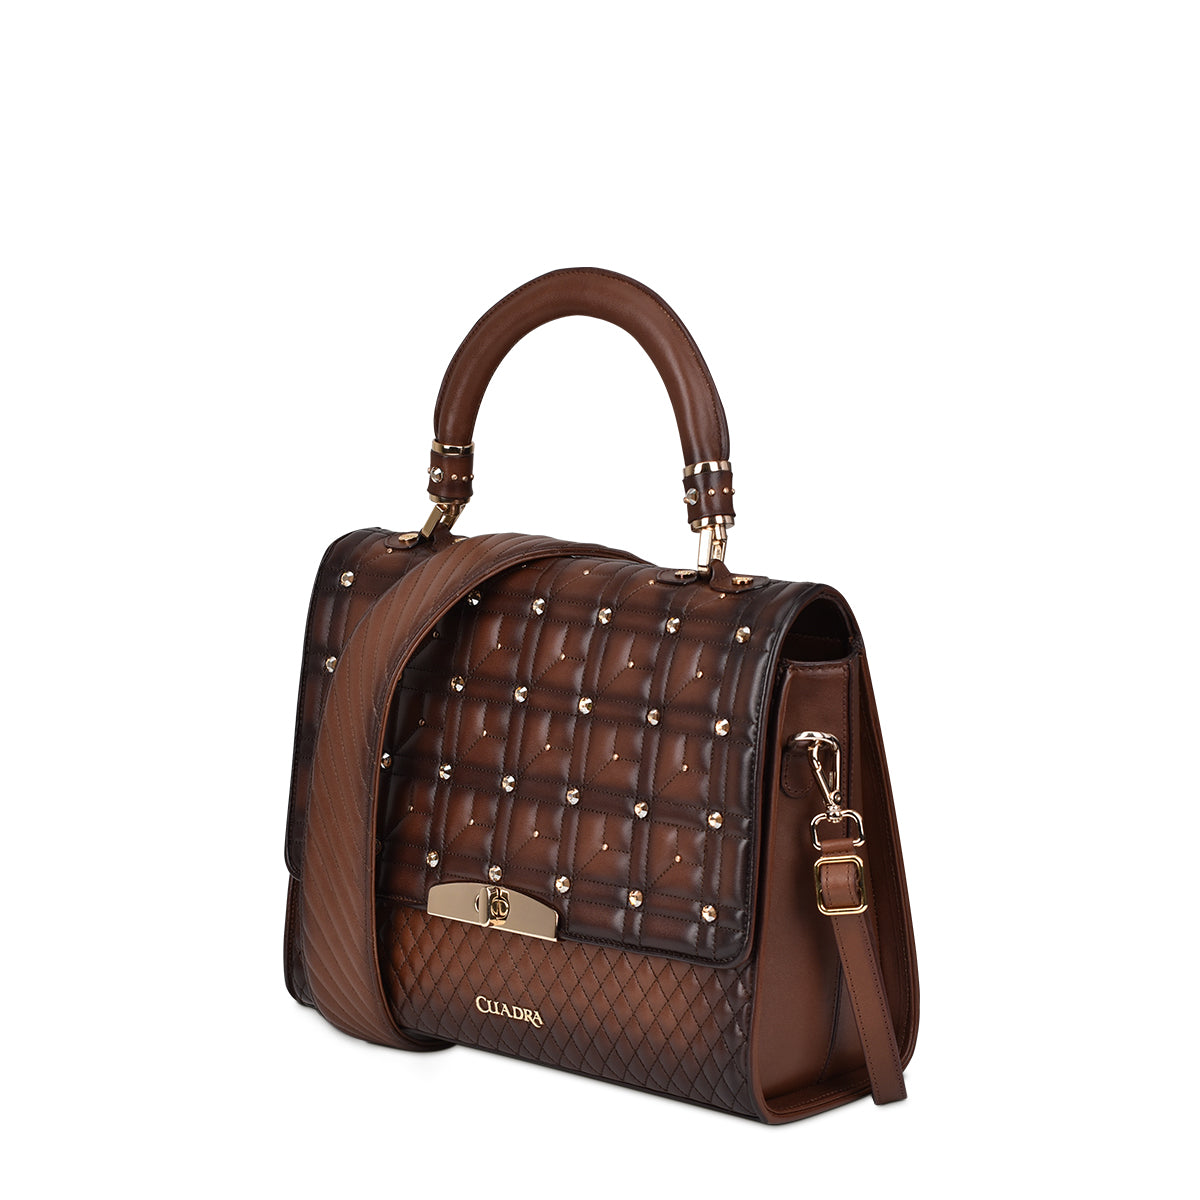 the bag has a secure closure with a sturdy metal clasp and magnets